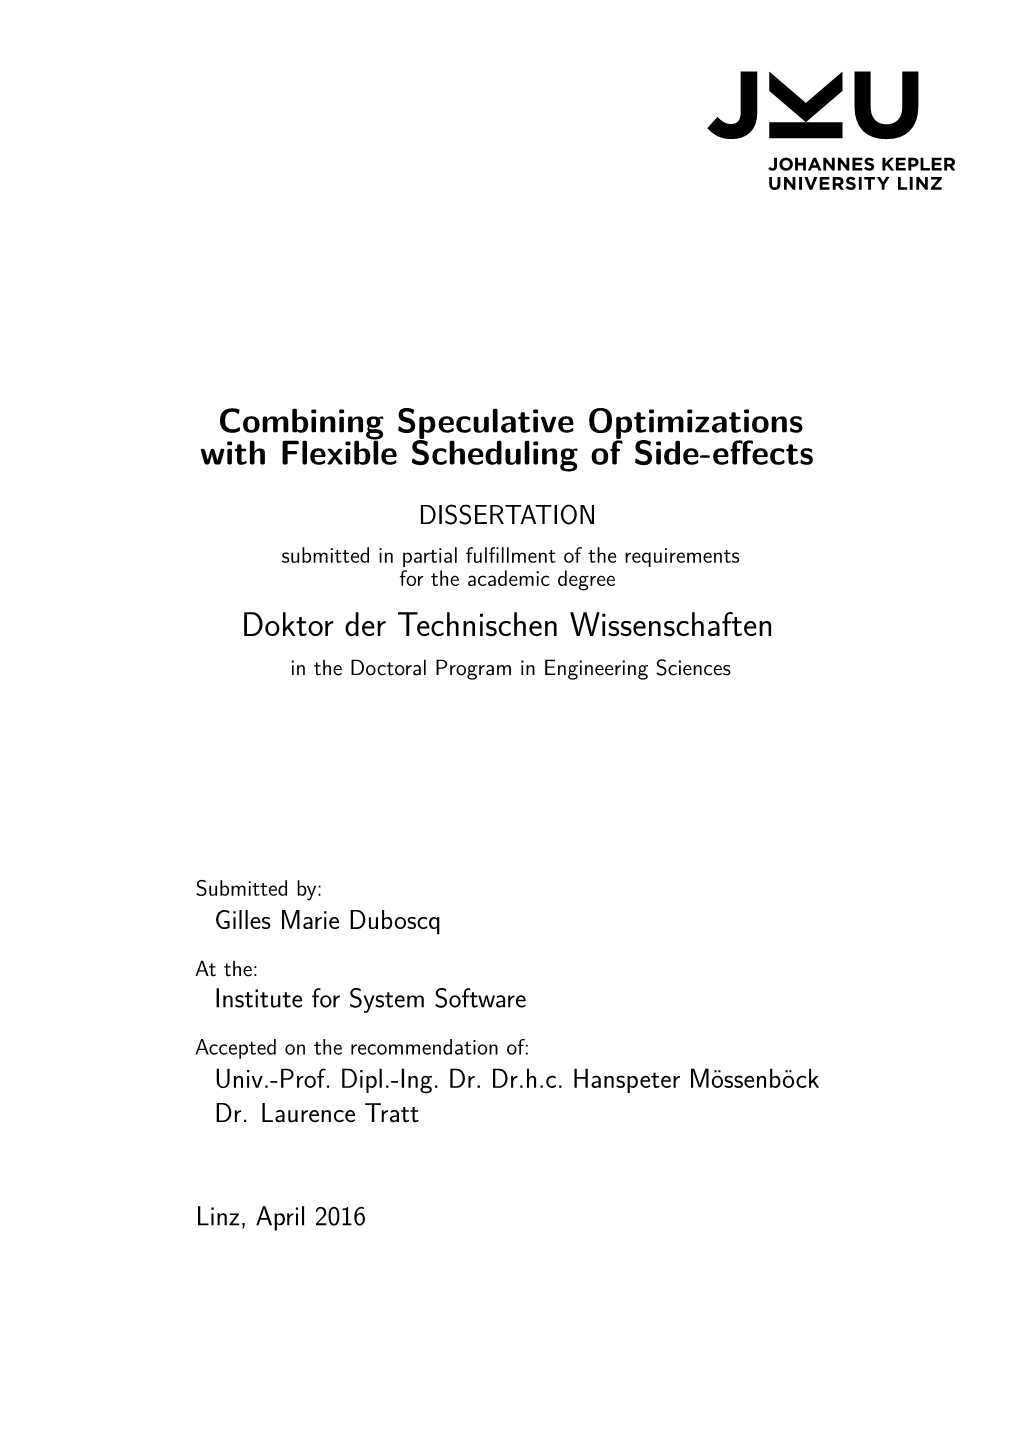 Combining Speculative Optimizations with Flexible Scheduling of Side-Effects